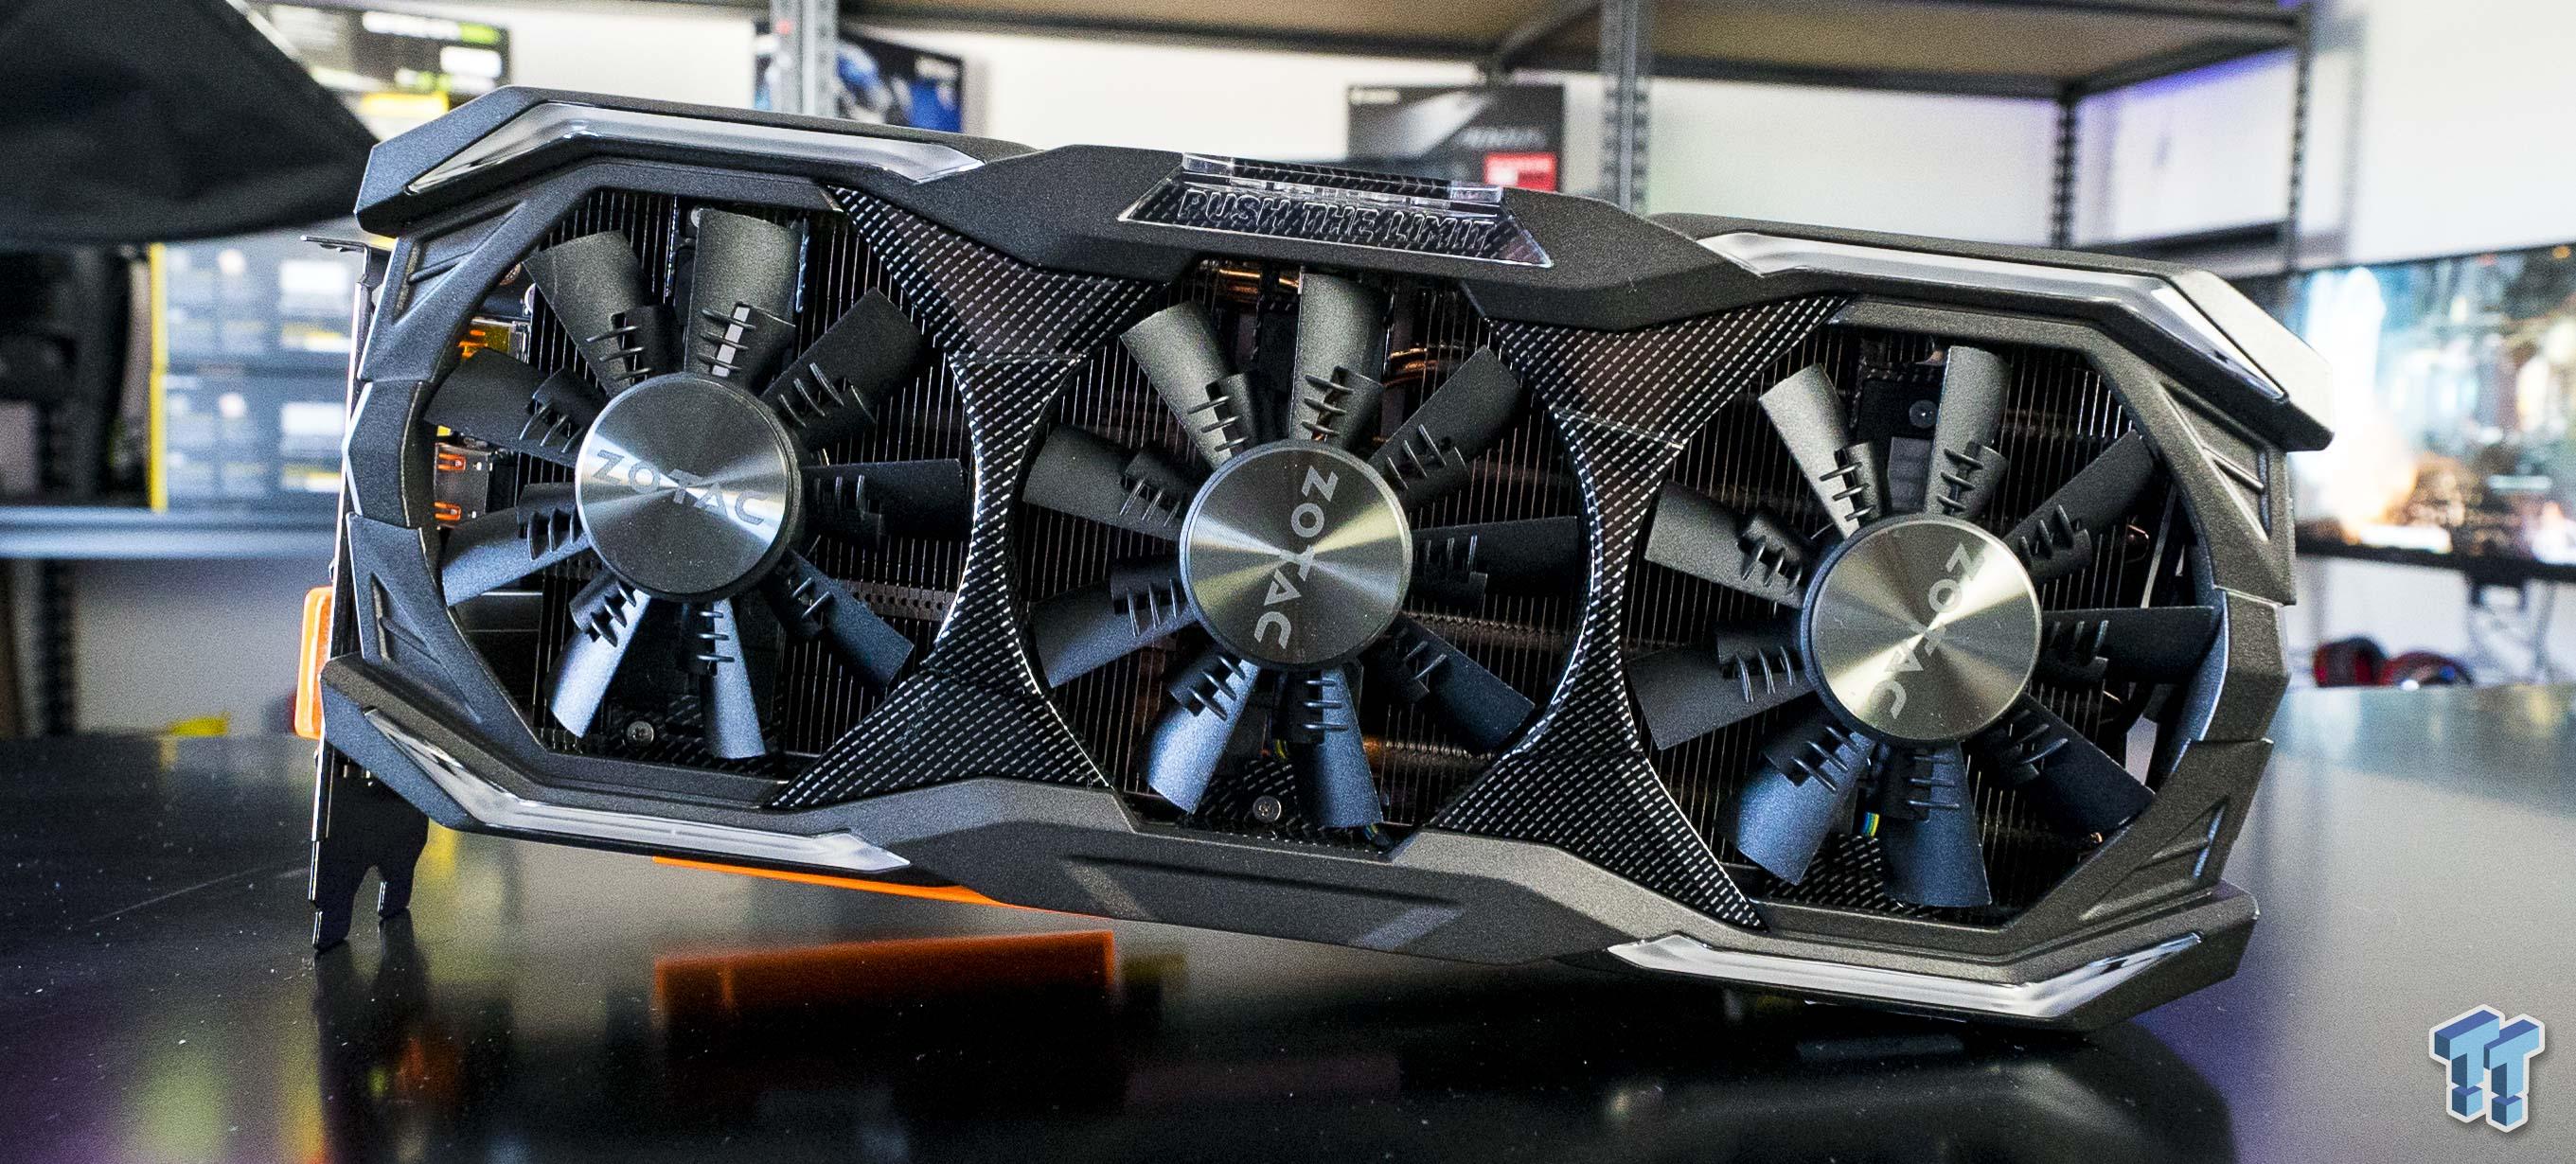 ZOTAC GeForce GTX 1070 Ti AMP! Extreme Graphics Card Review